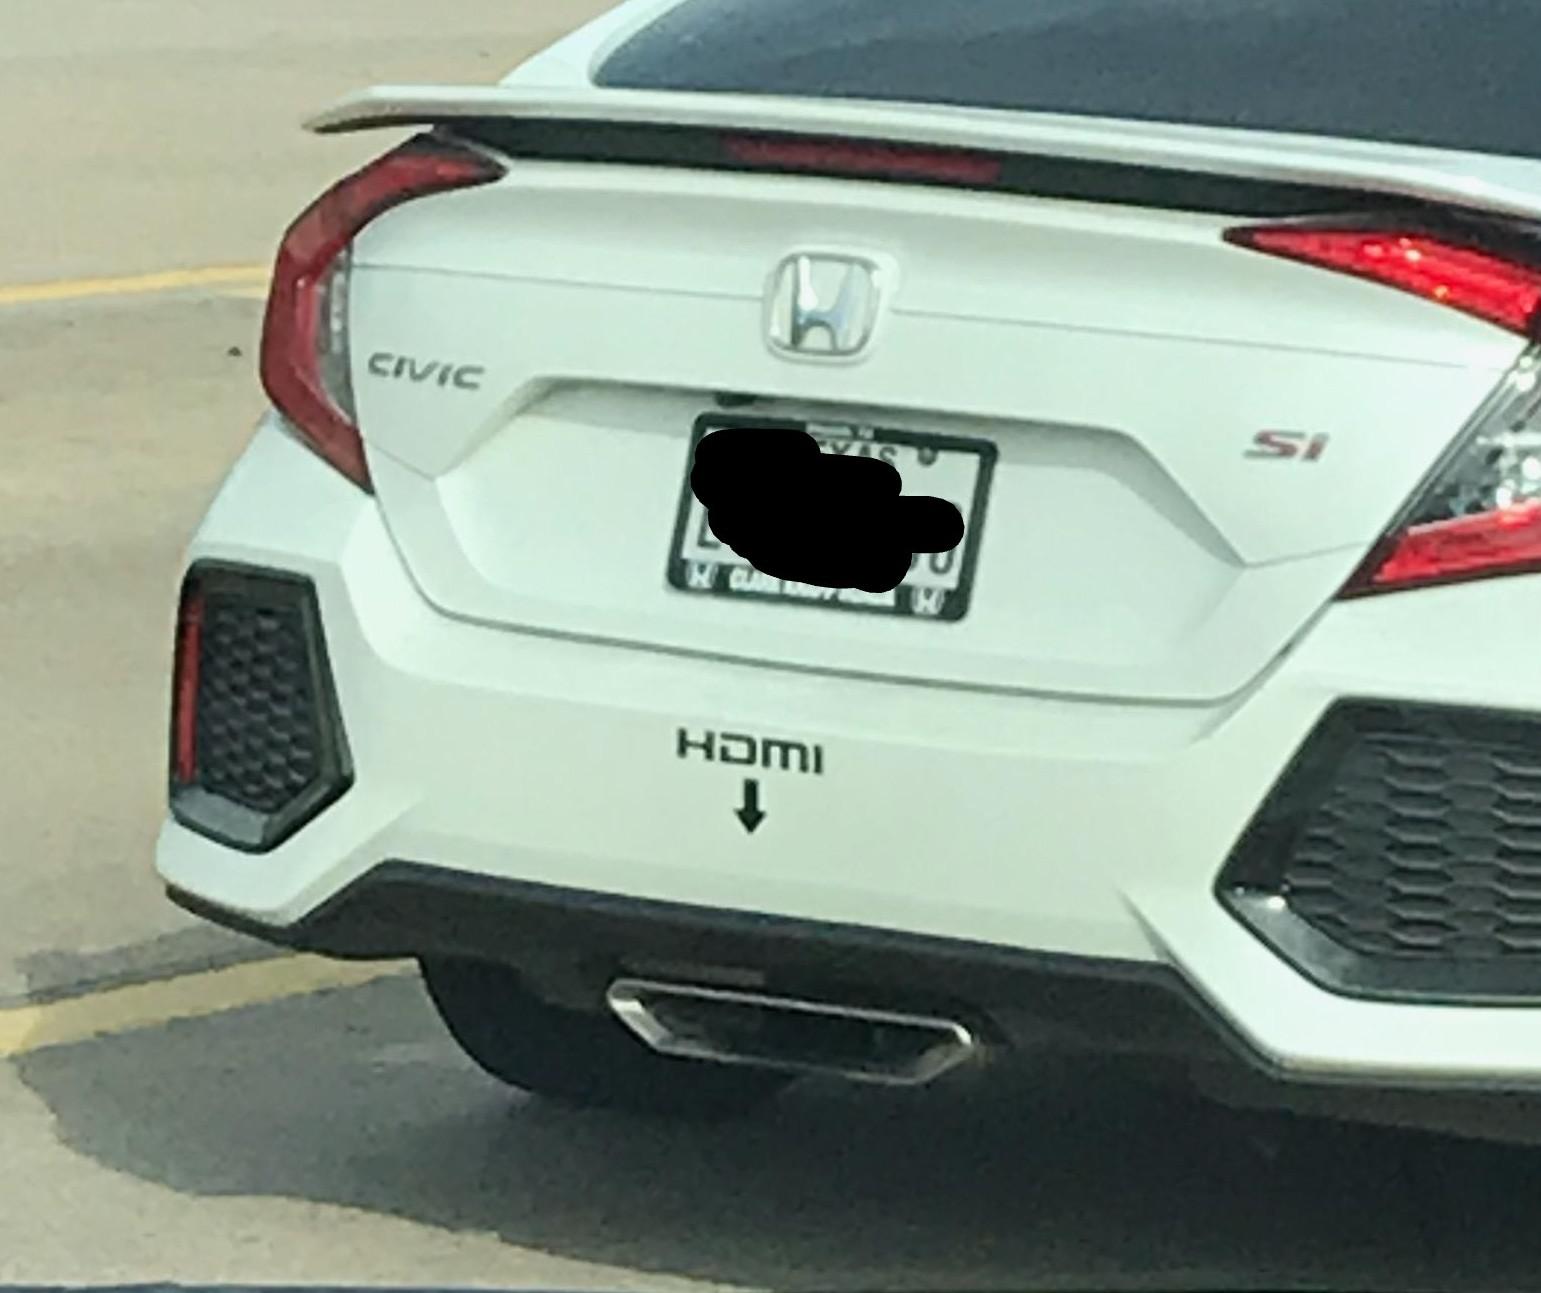 Viral Honda Civic Si Looks Geeky with an HDMI Exhaust and No Headphone